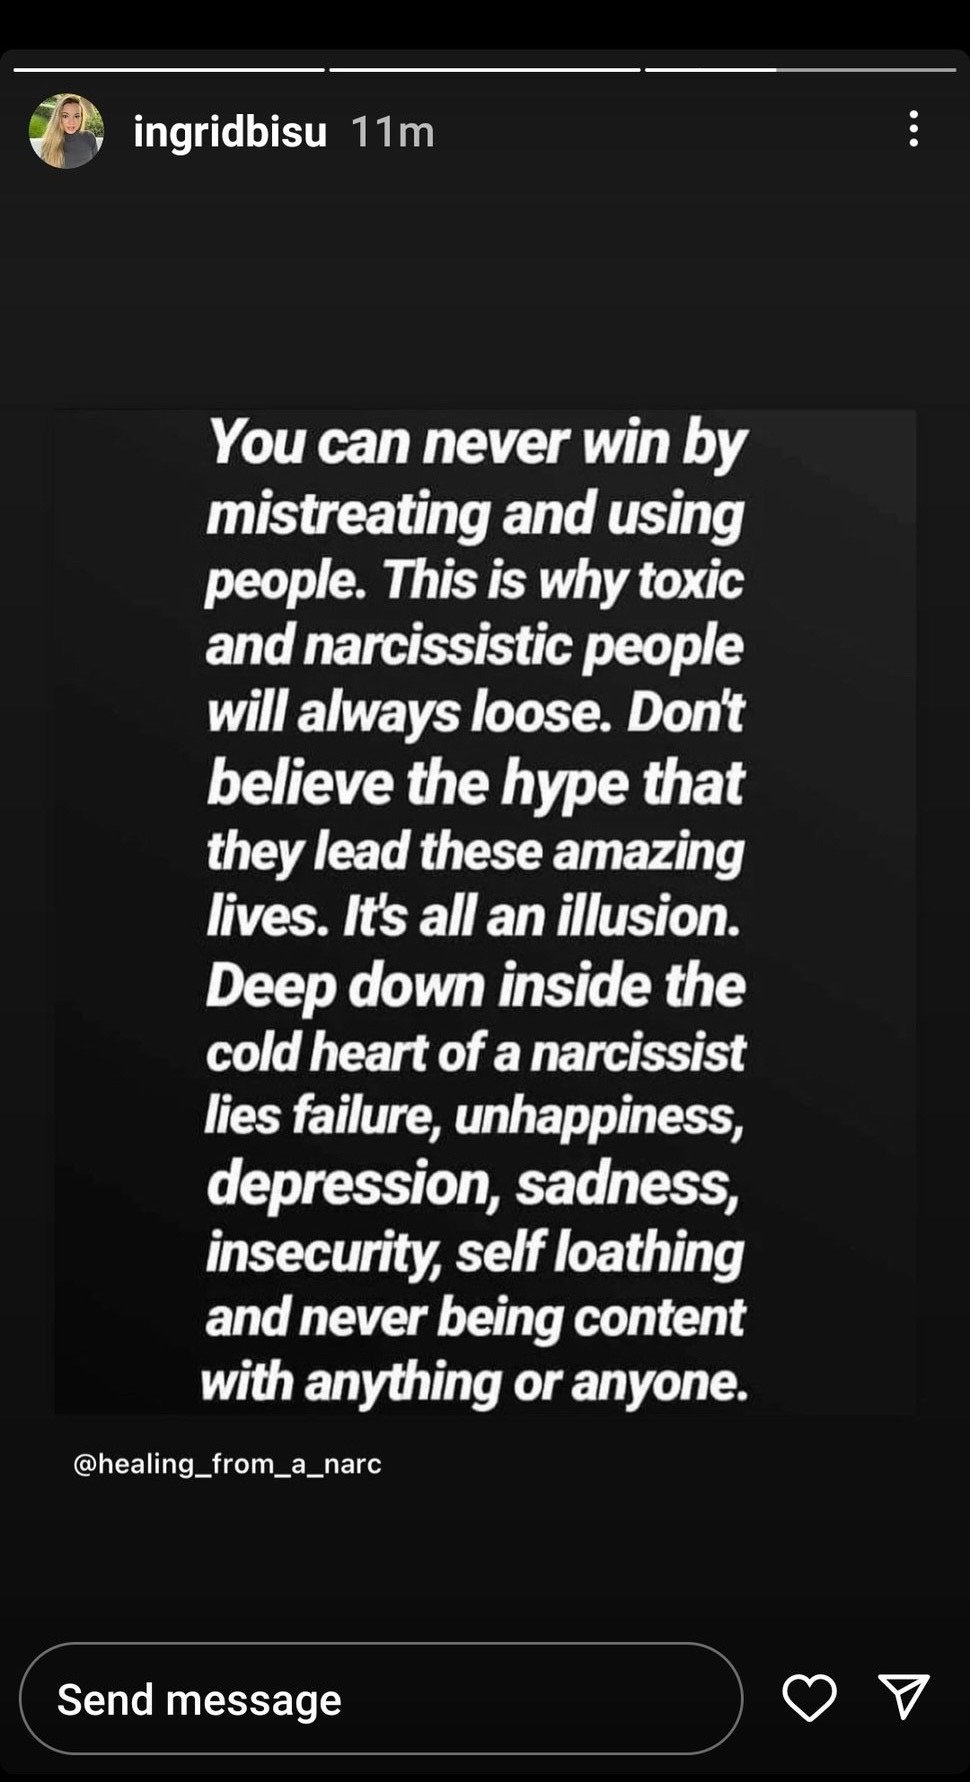 "You can never win by mistreating and using people. This is why toxic and narcissistic people will always loose [sic]. Don't believe the hype that they lead these amazing lives. It's all an illusion. Deep down inside the cold heart of a narcissist lies failure, unhappiness, depression, sadness, insecurity, self loathing and never being content with anything or anyone.